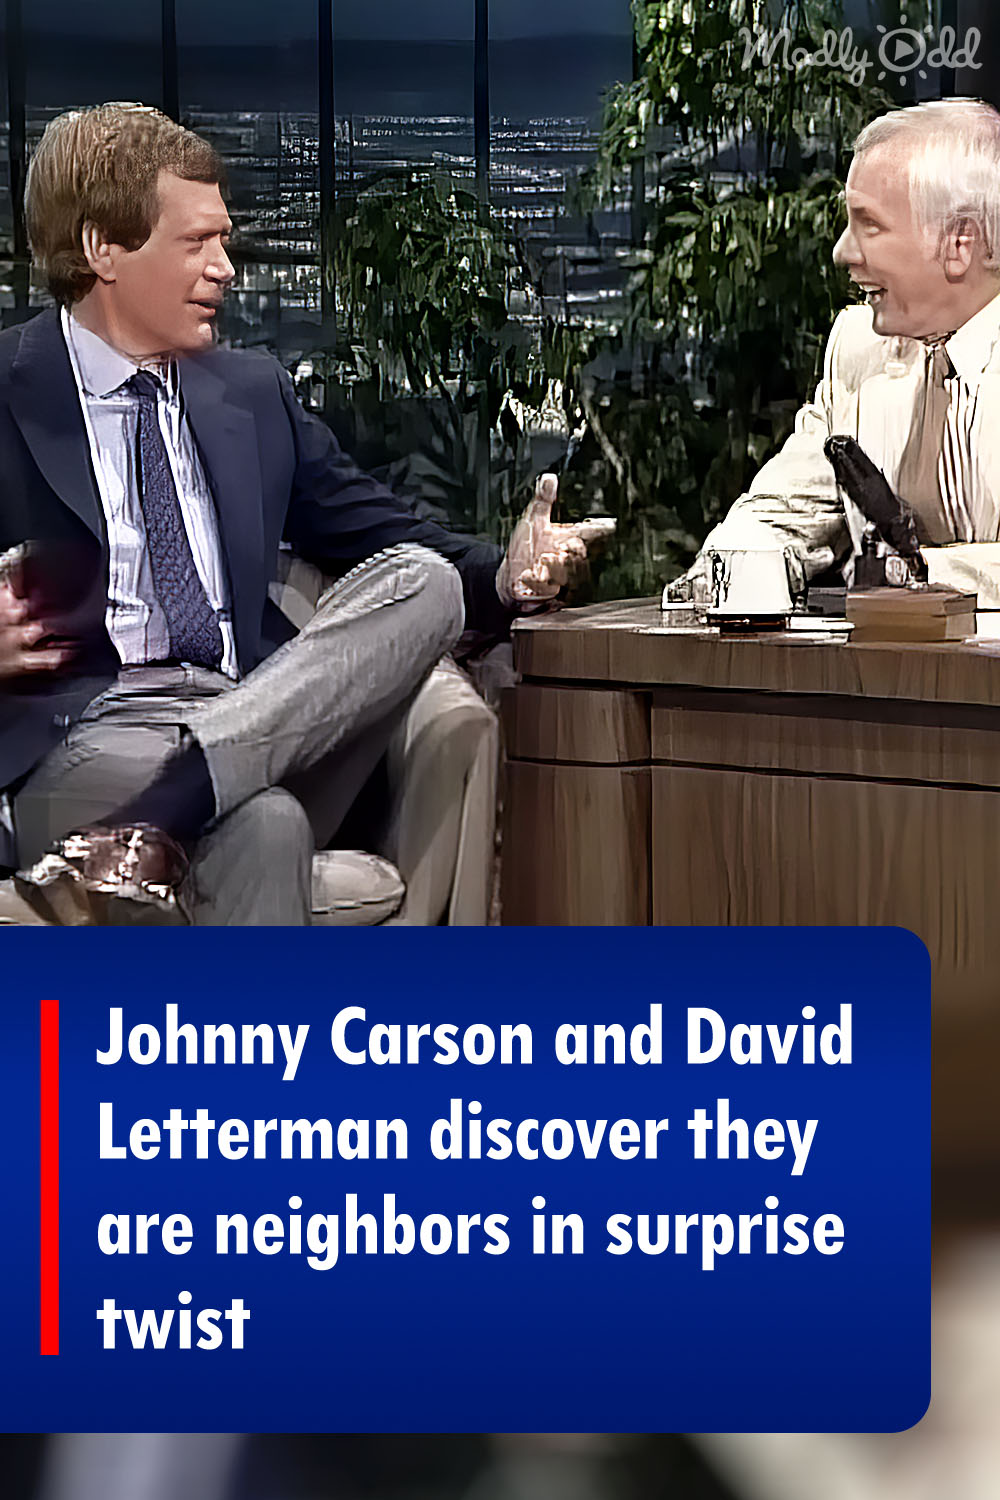 Johnny Carson and David Letterman discover they are neighbors in surprise twist